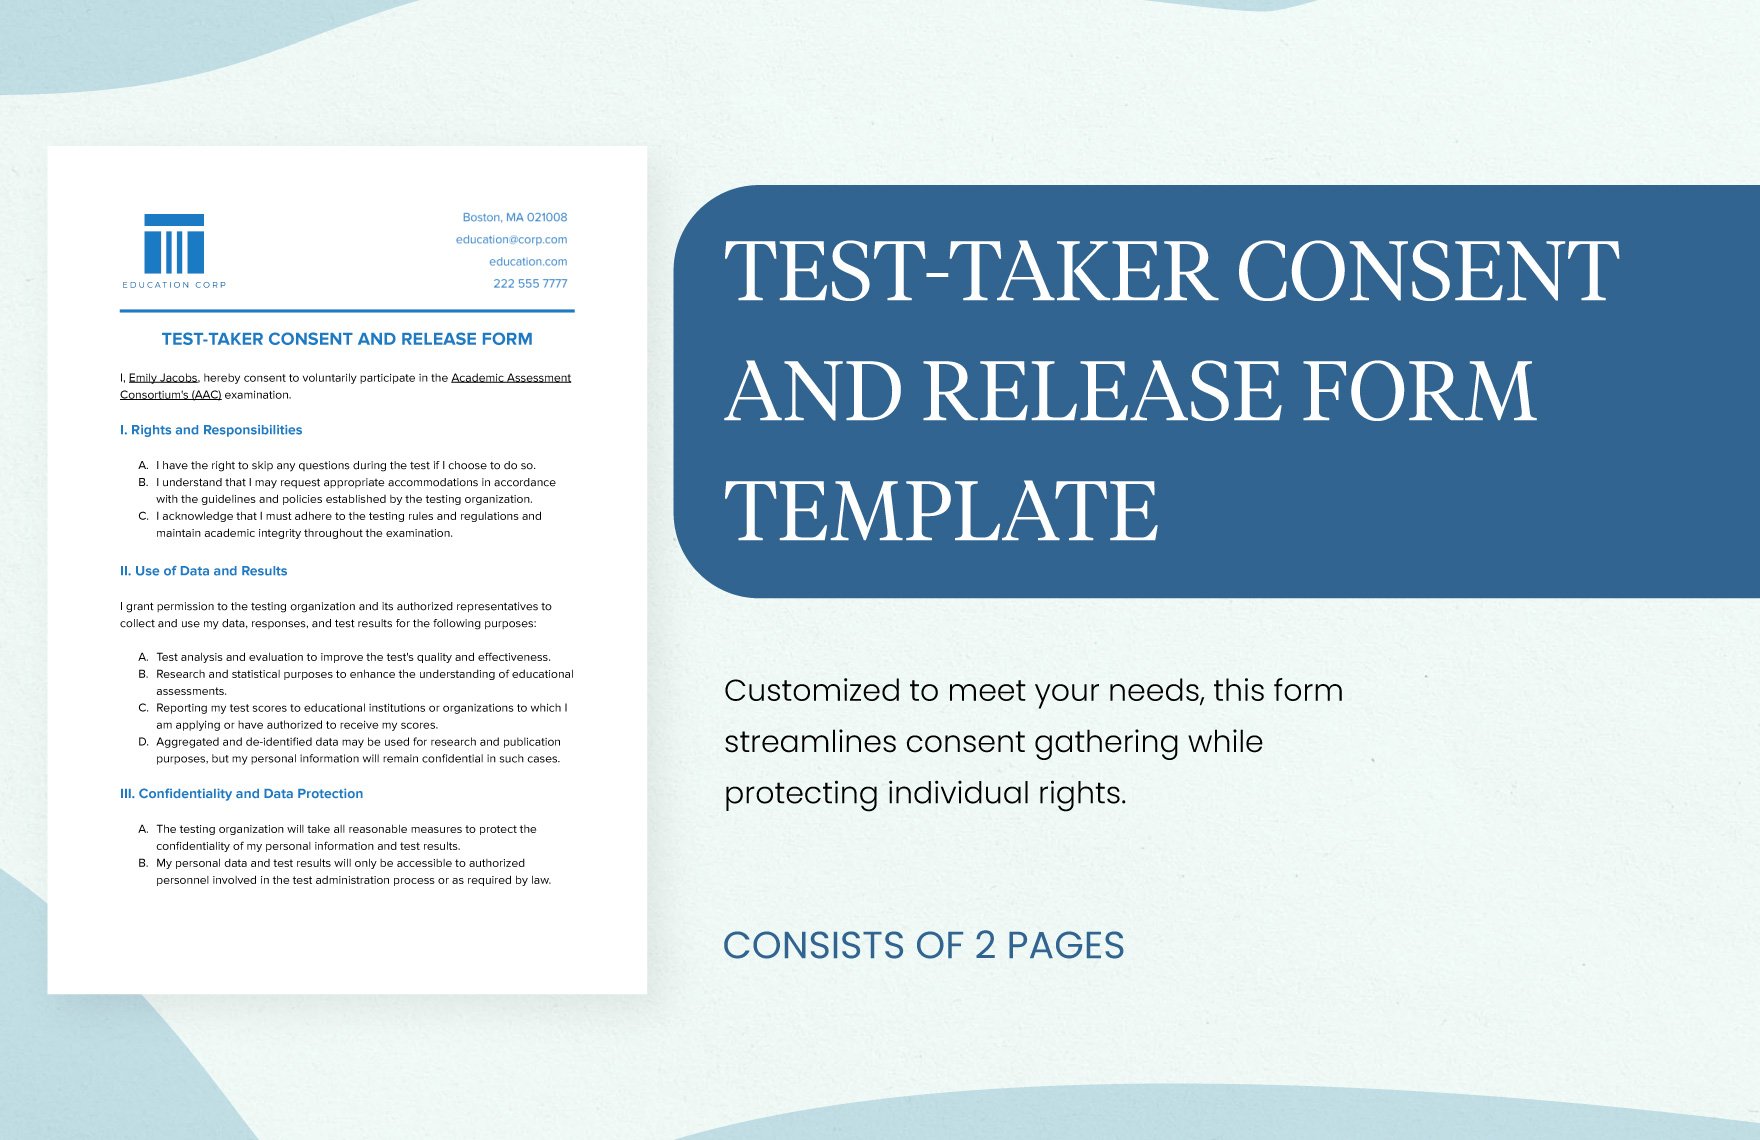 Test-Taker Consent and Release Form Template